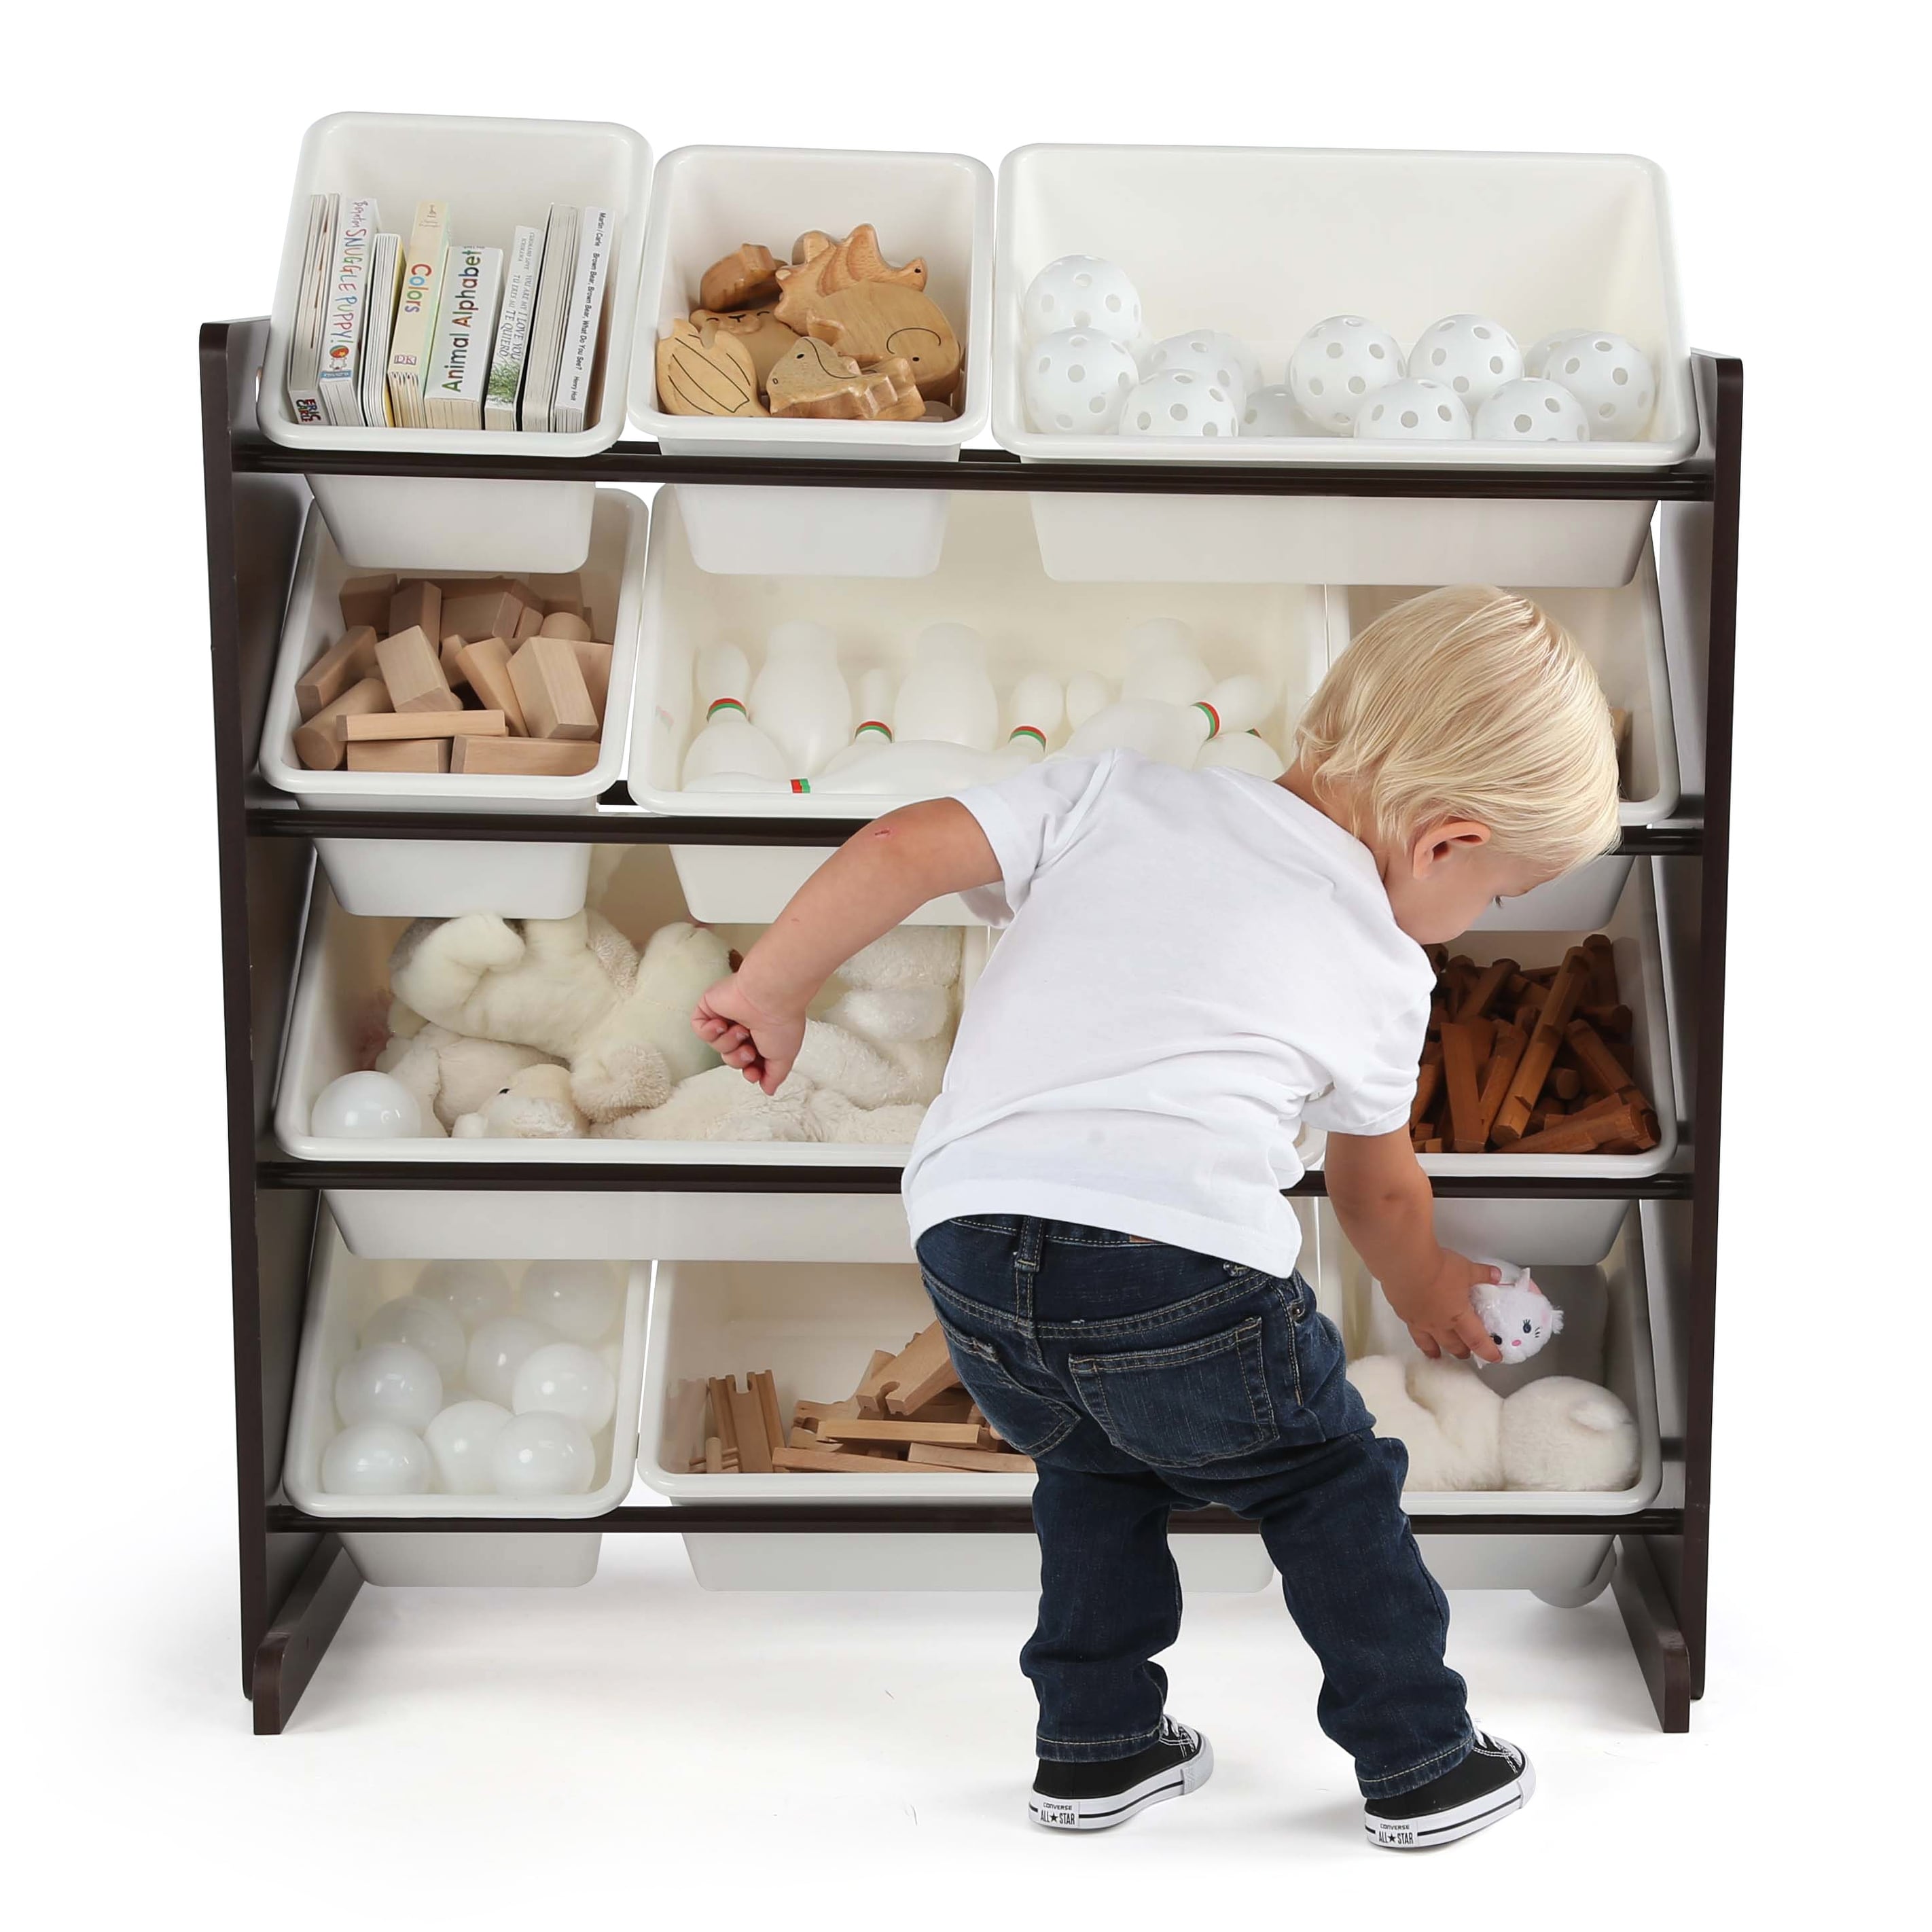 https://ak1.ostkcdn.com/images/products/is/images/direct/2877889940d4092ba5f19720c0a159ebbeb6fadc/Tot-Tutors-Kids-Toy-Storage-Organizer-with-12-Plastic-Bins%2C-Natural-Frame-%26-Primary-Bins.jpg